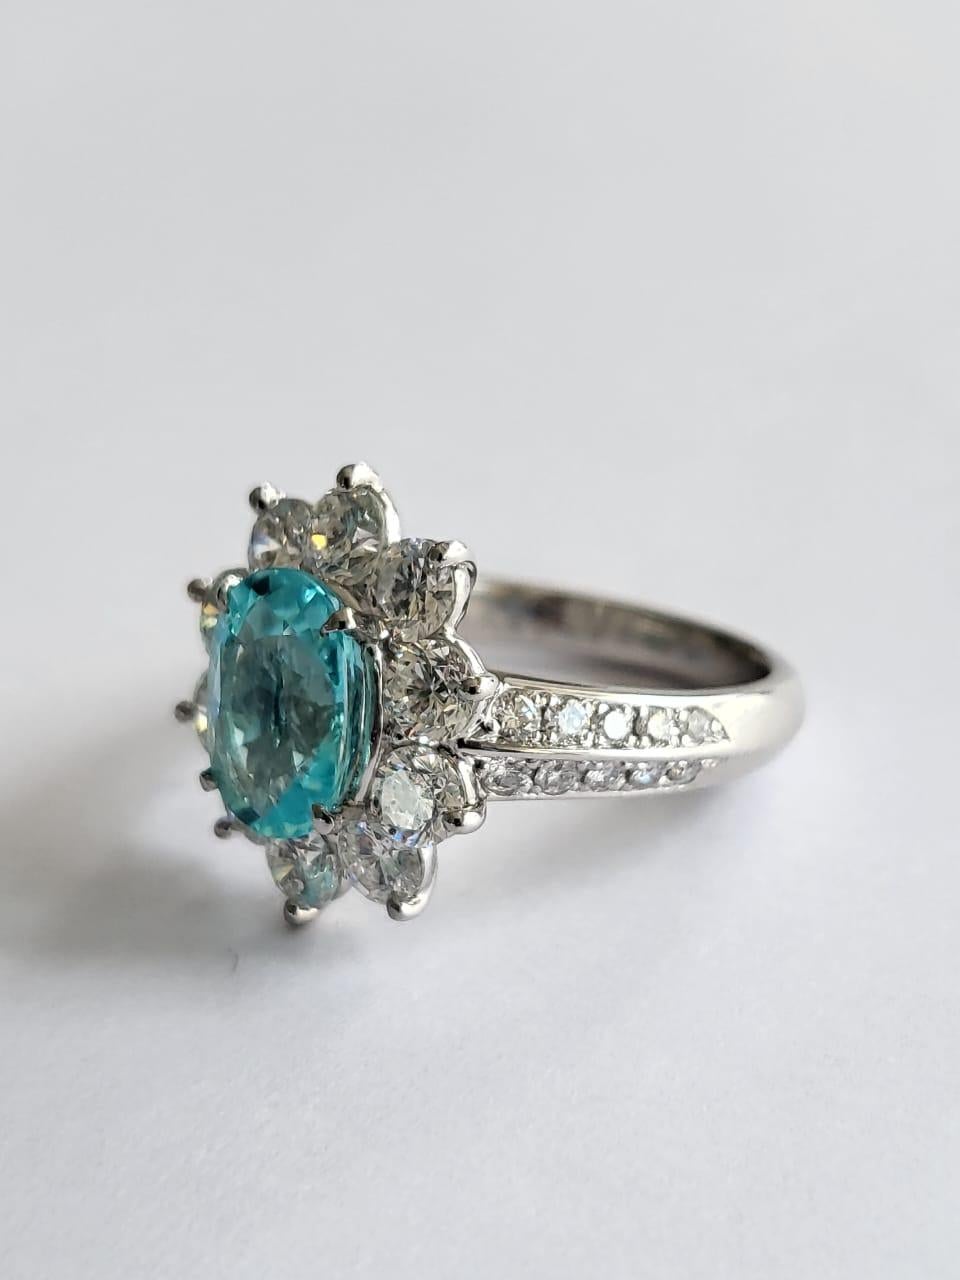 Oval Cut GIA Certified 1.83 Carat Paraiba Tourmaline Diamond Engagement Cocktail Ring For Sale